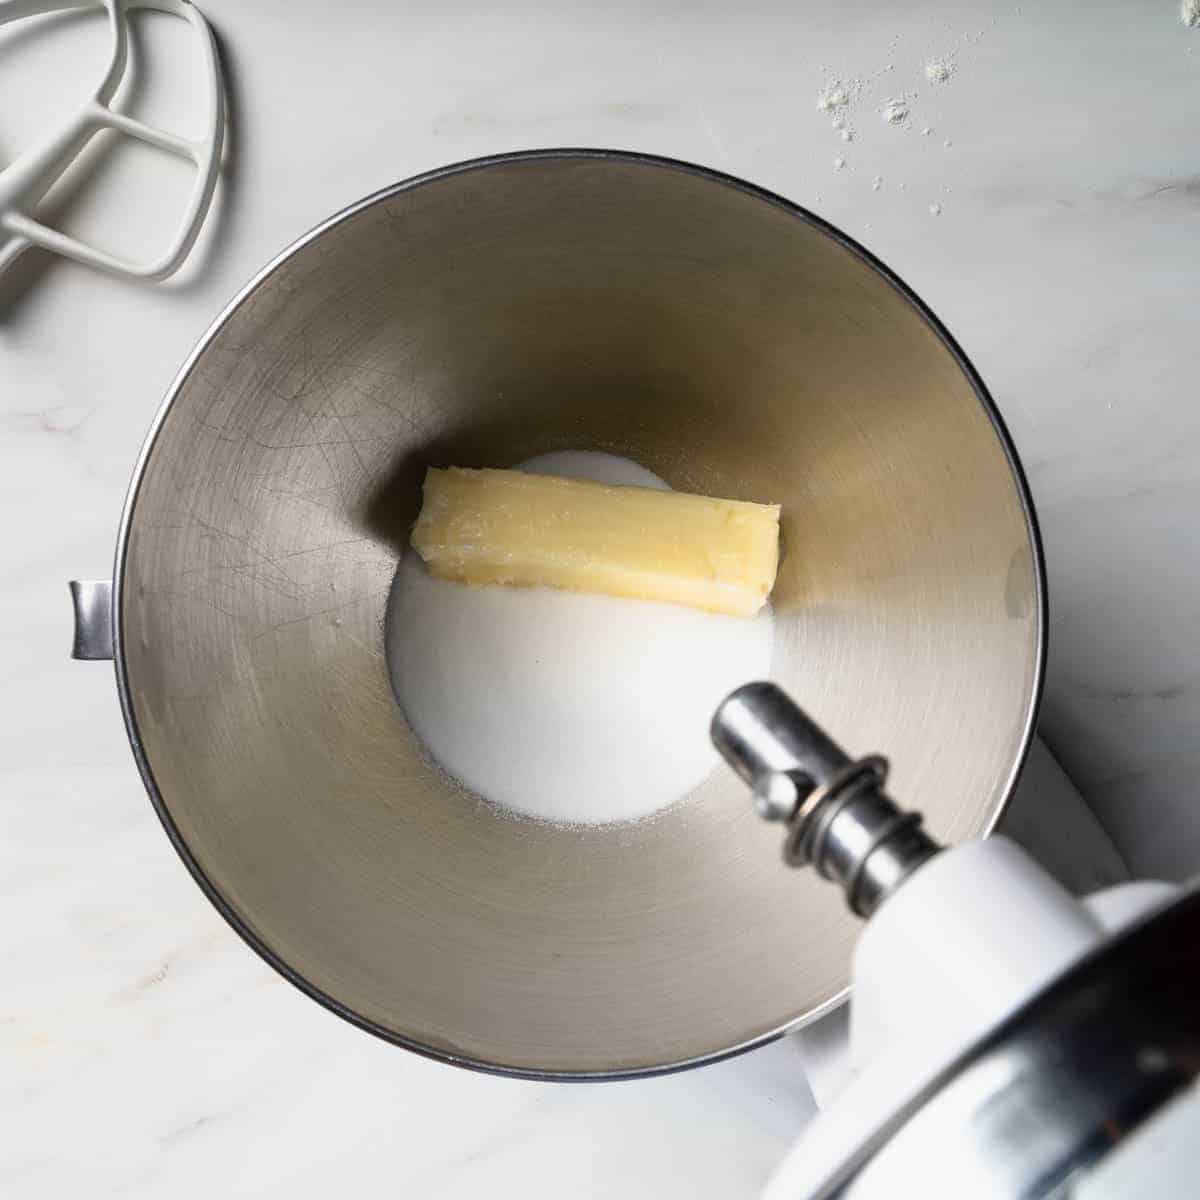 The bowl of a stand mixer with sugar and a soft stick of butter